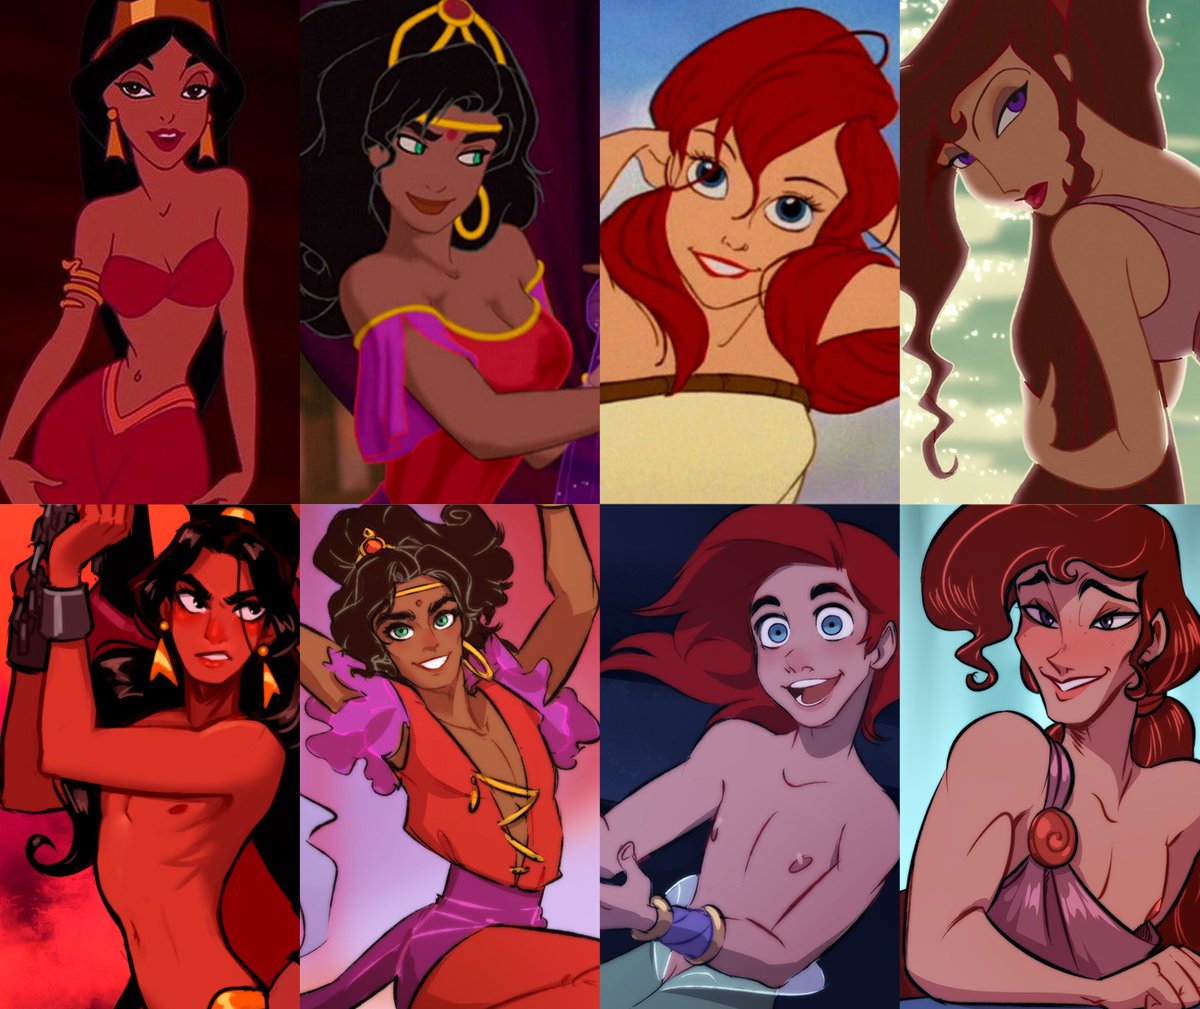 The hottest Disney characters for my taste!) 